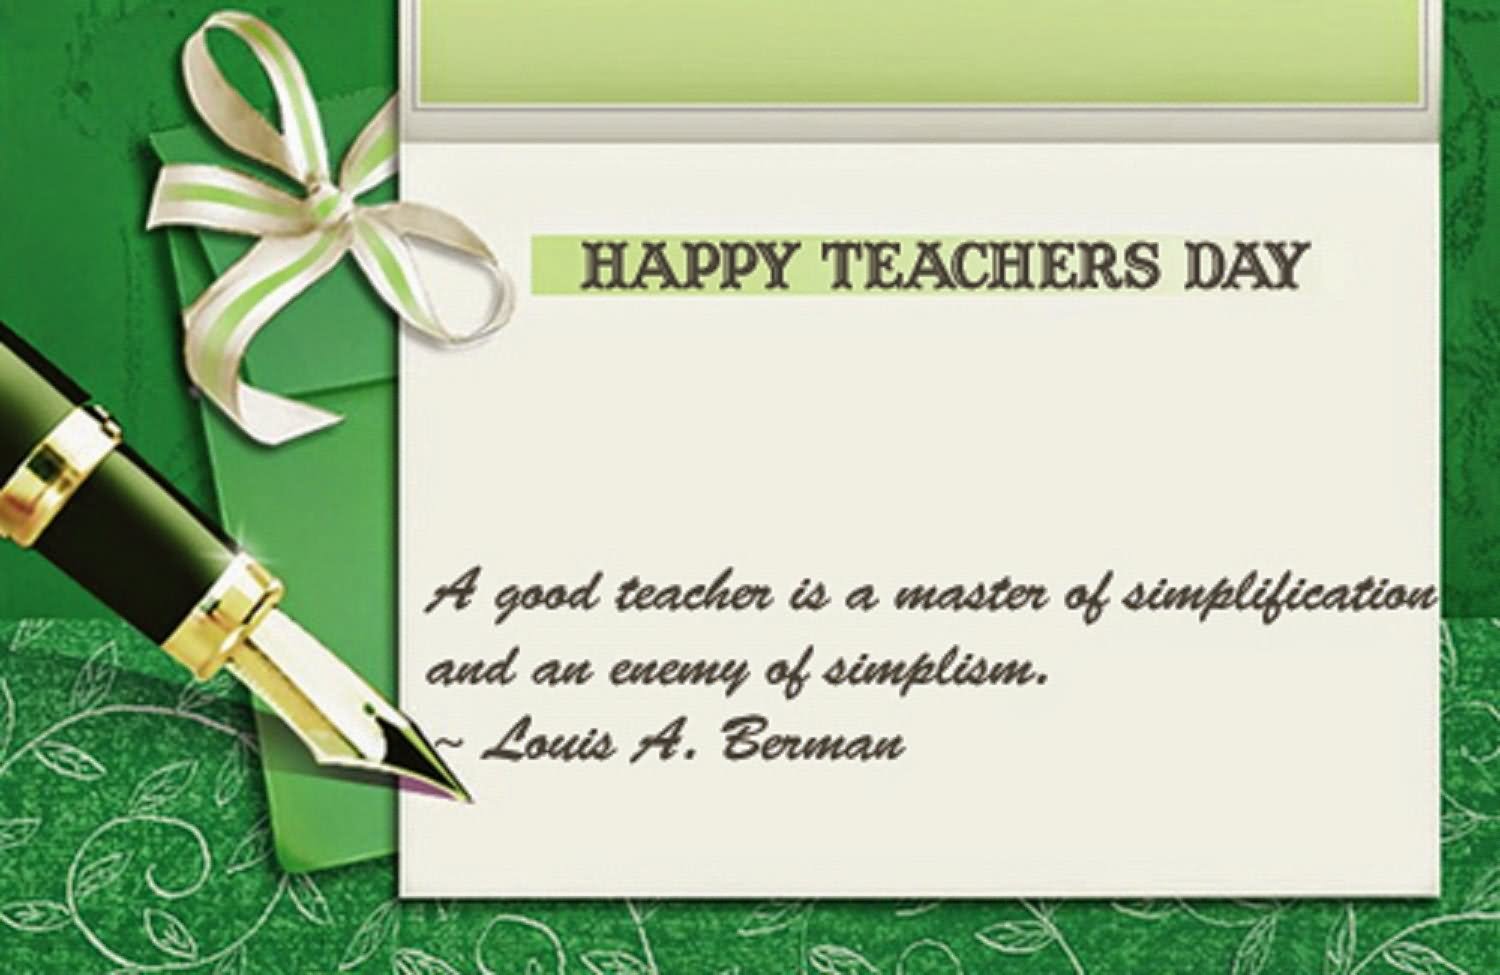 Happy Teacher’s Day A Good Teacher Is A Master Of Simplification And An Enemy Of Simplism